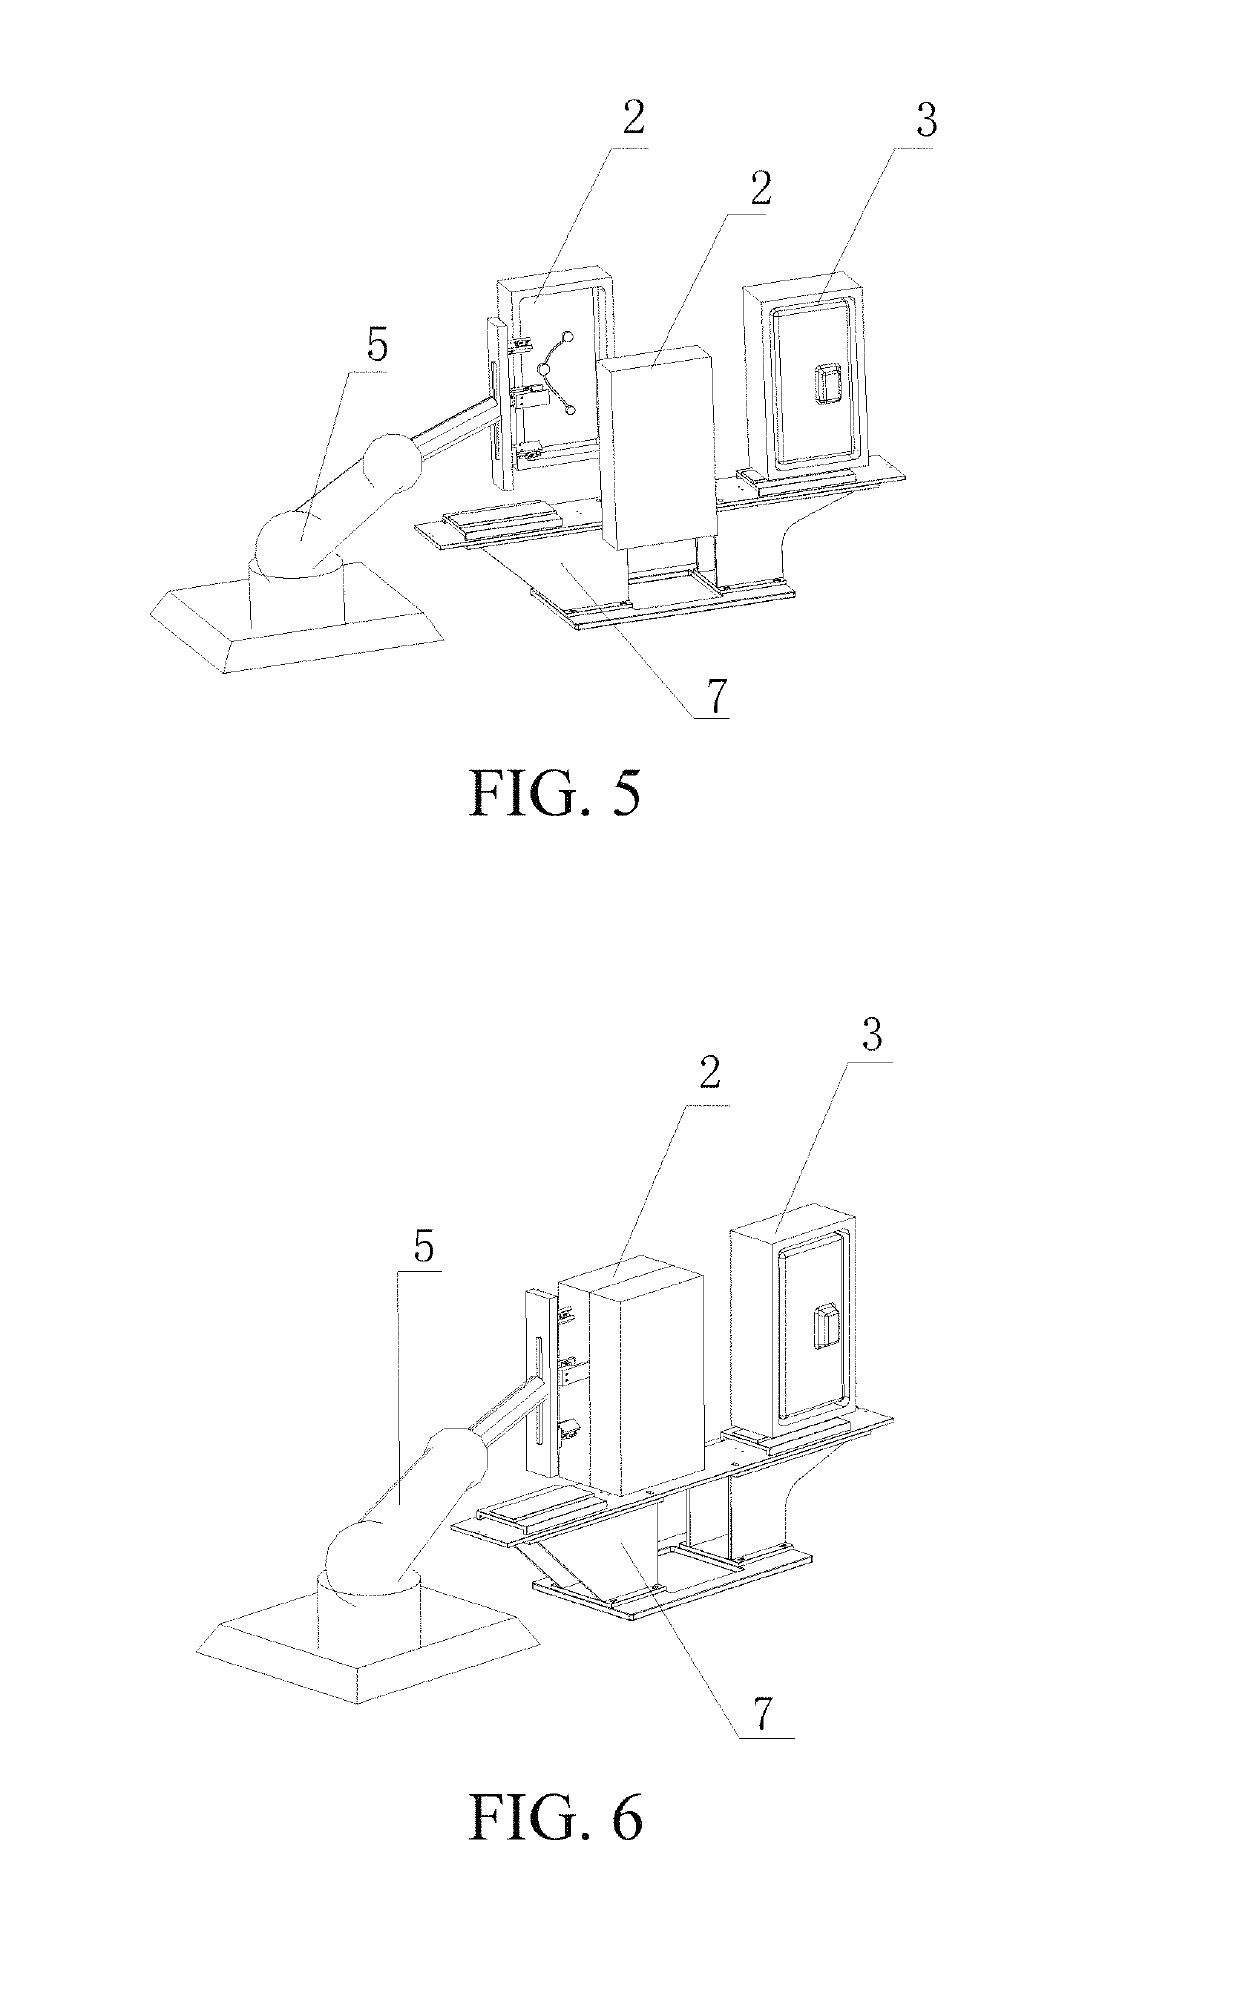 Method for molding two-piece blow molded hollow tank by using auxiliary male molds